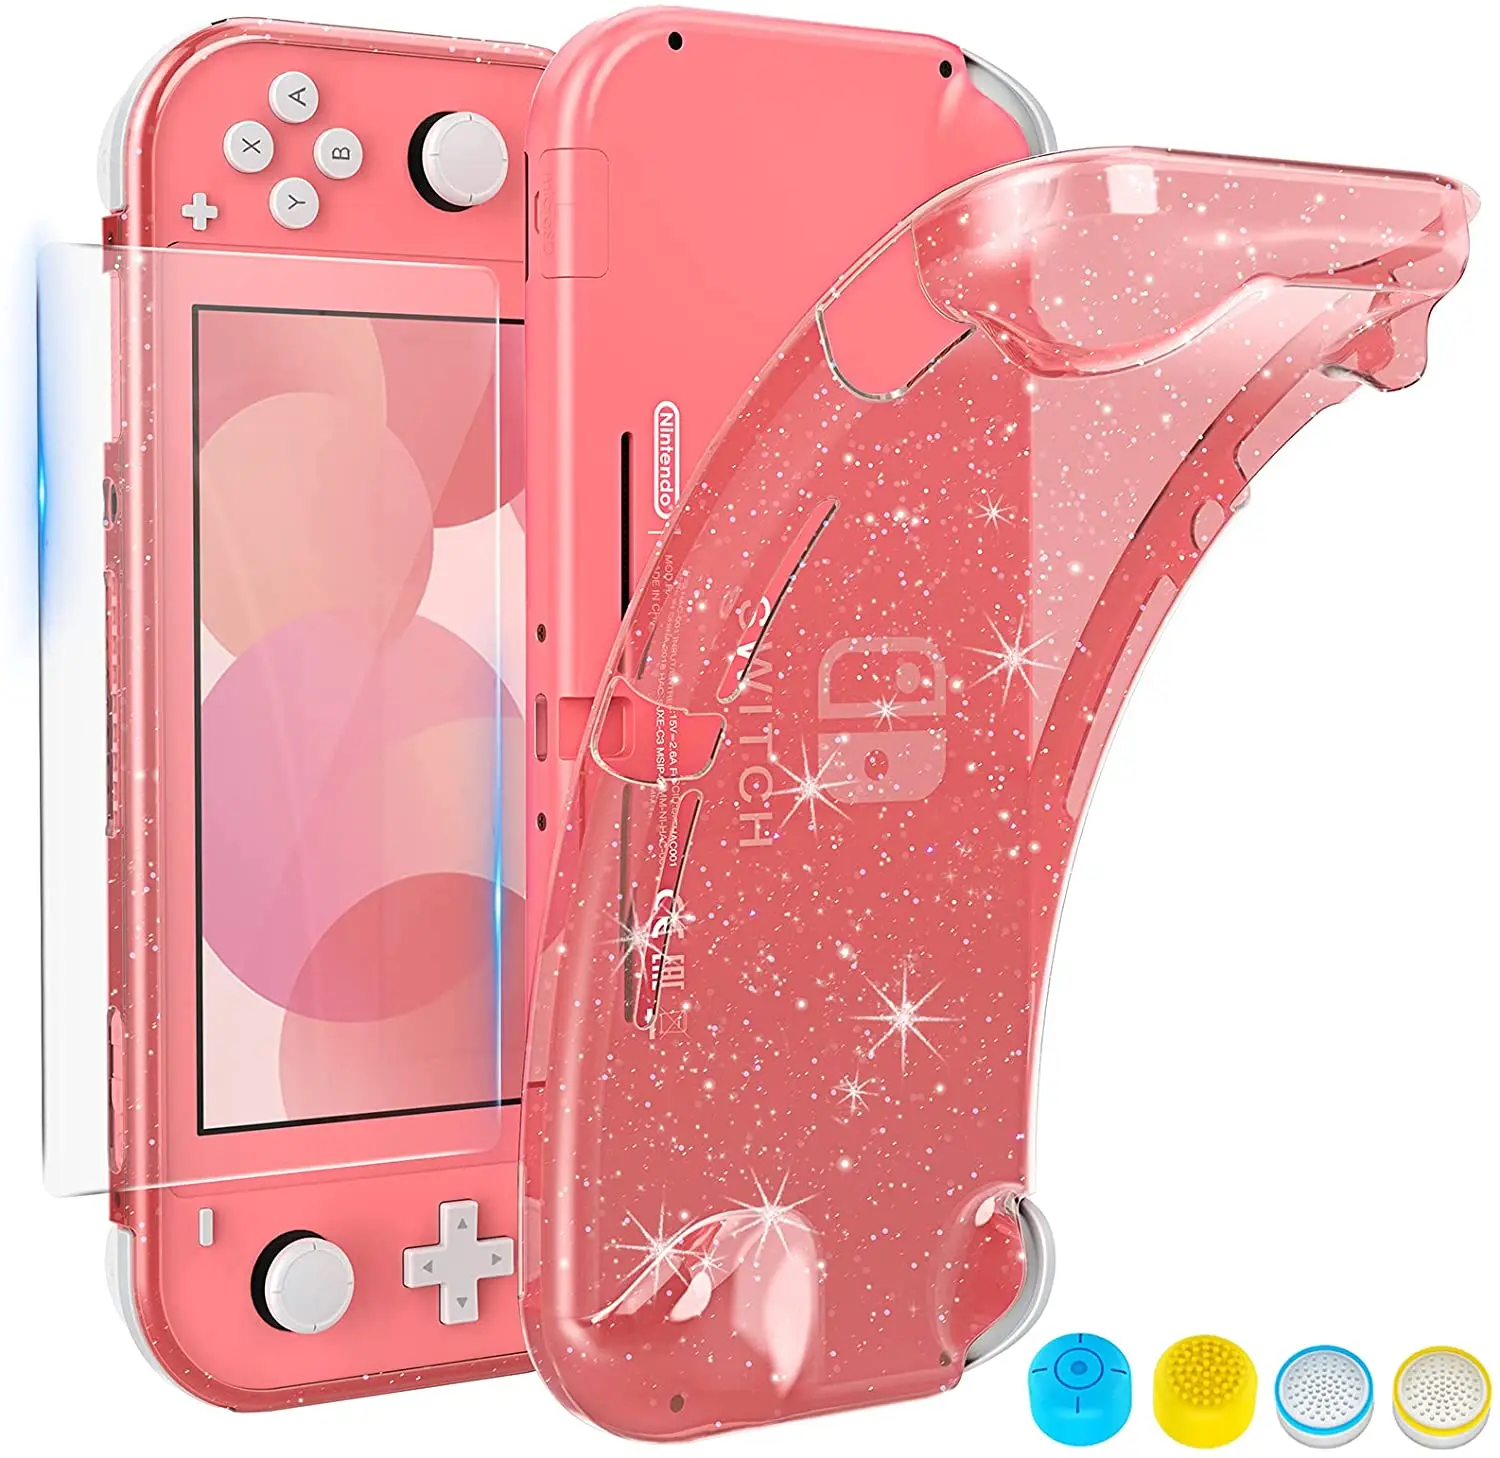 Protective Case for Nintendo Switch Lite, Full Protection Switch Lite  Cover, TPU Shock-Absorption and Anti-Scratch for Nintendo Switch Lite Skin  with